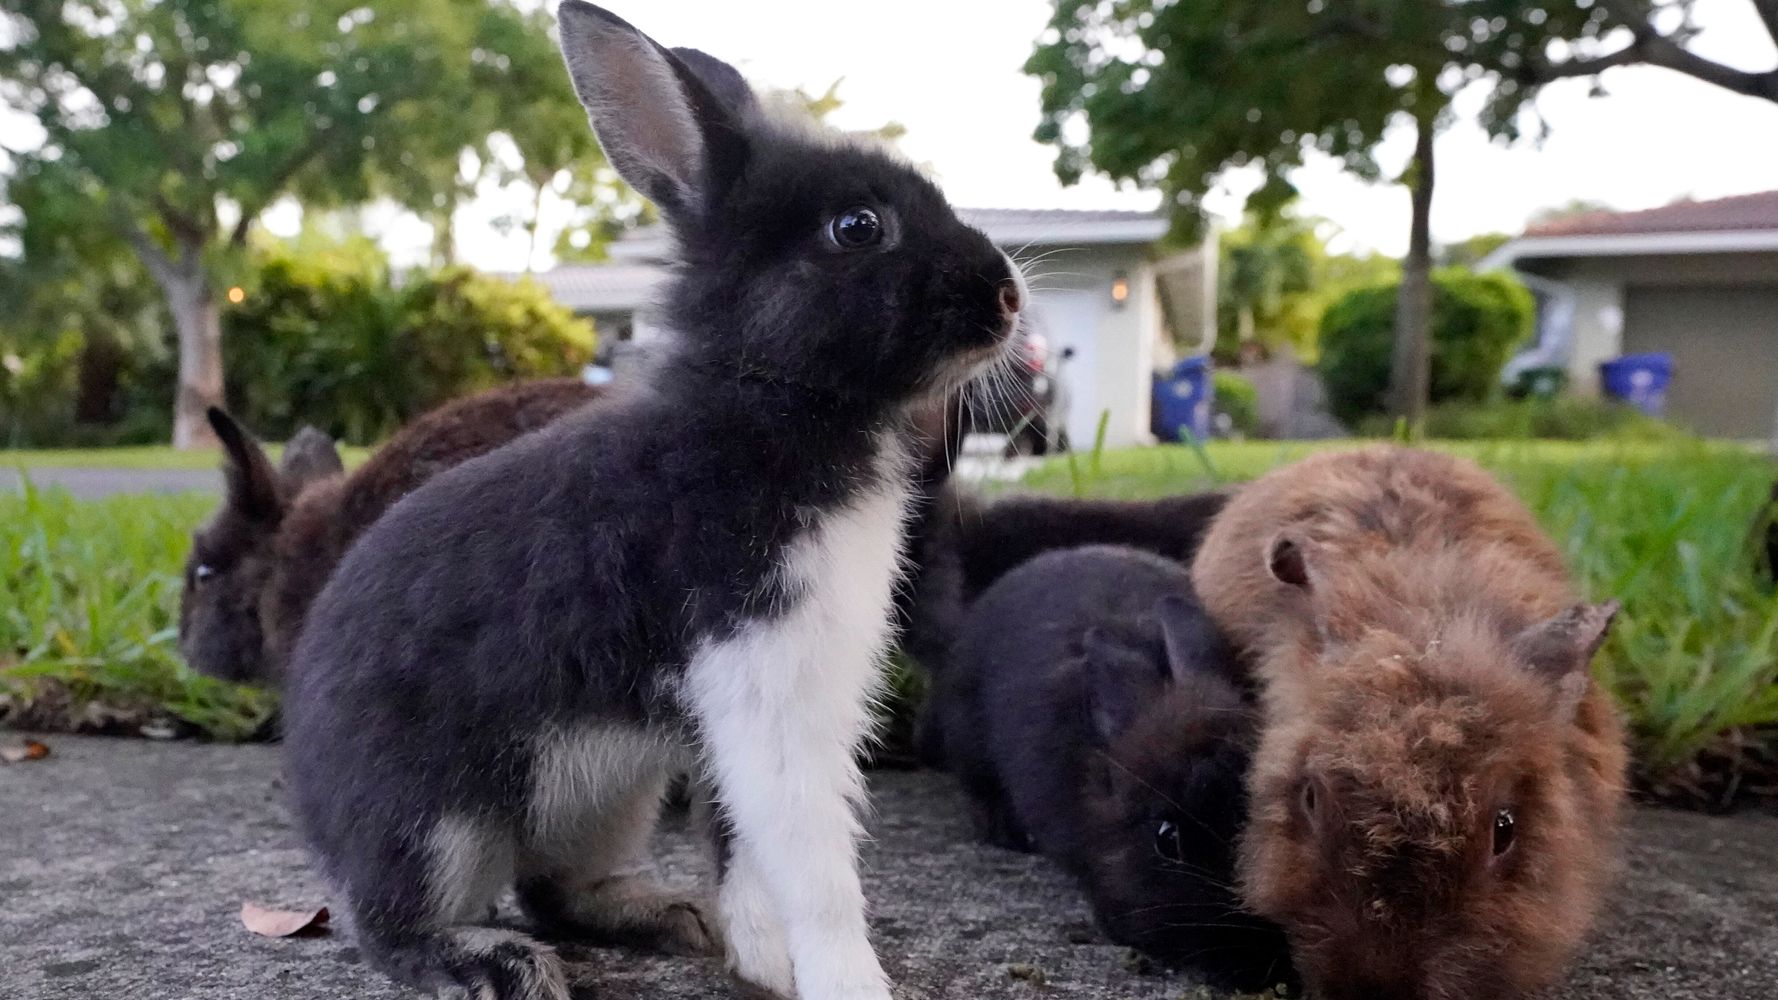 Florida Suburb Faces Invasion of Domestic Rabbits | HuffPost Weird